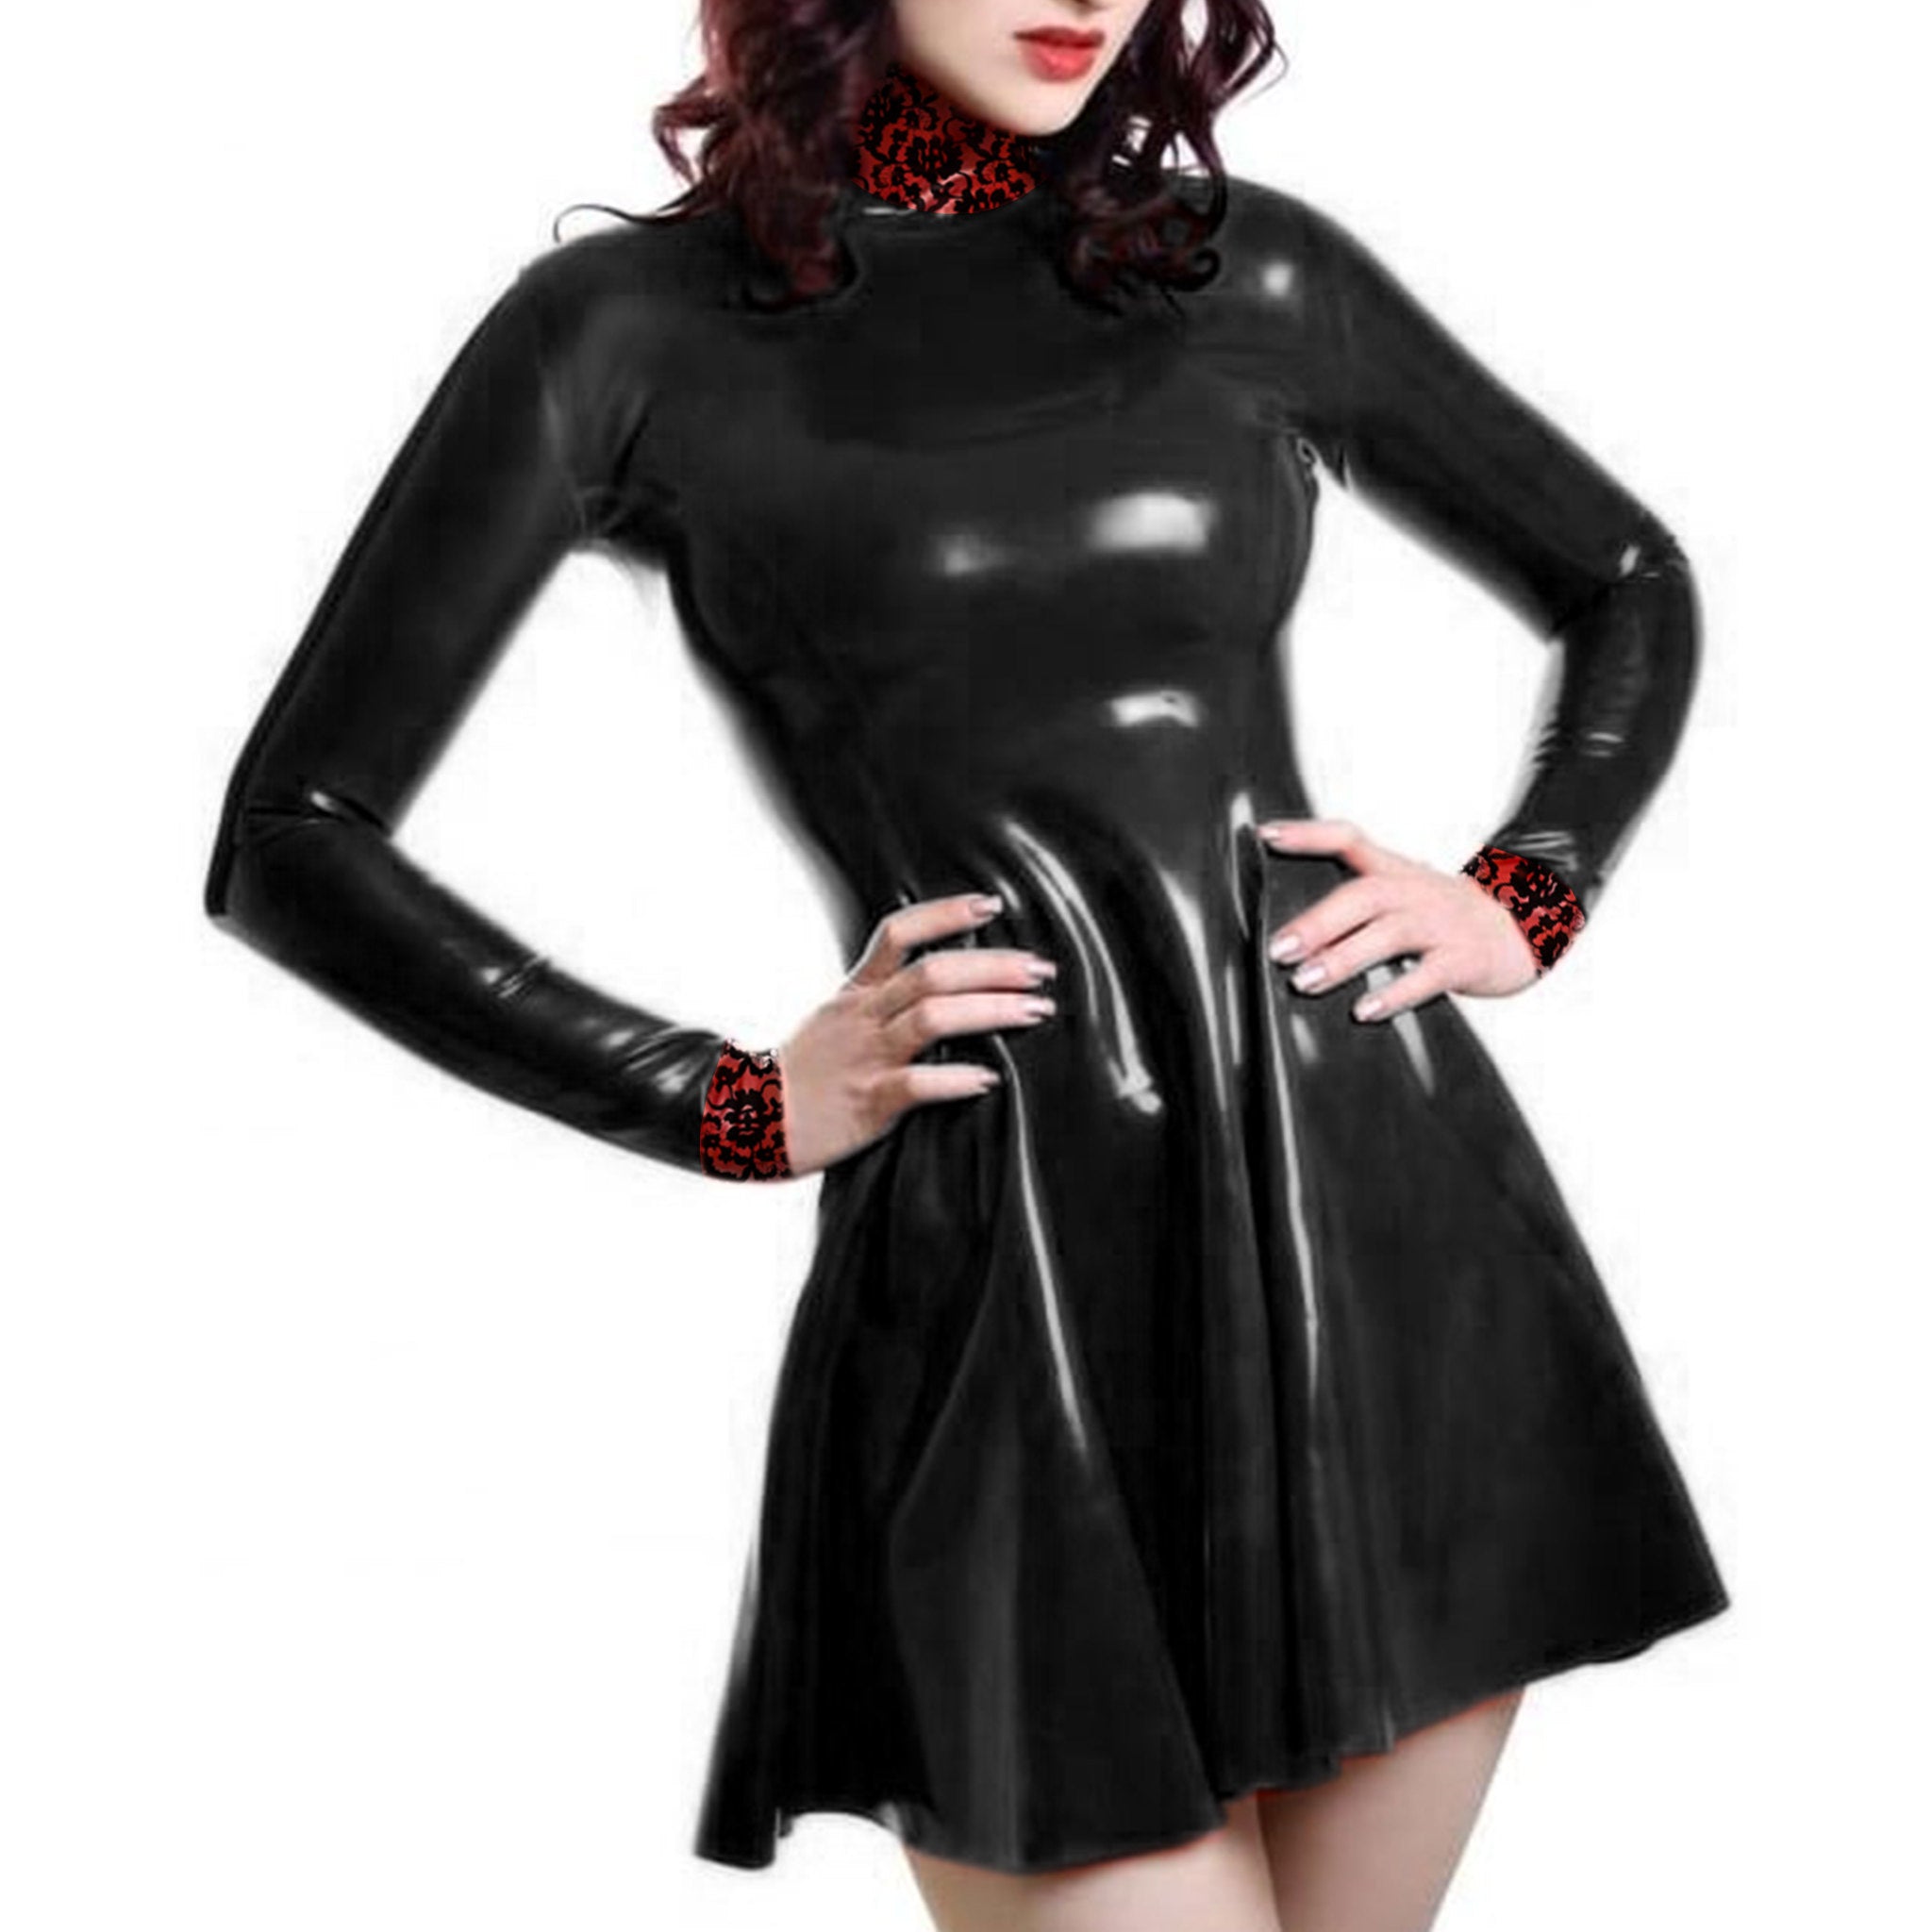 Long Sleeve Latex Swing Dress With Contrast Lace Collar & Cuffs Size L